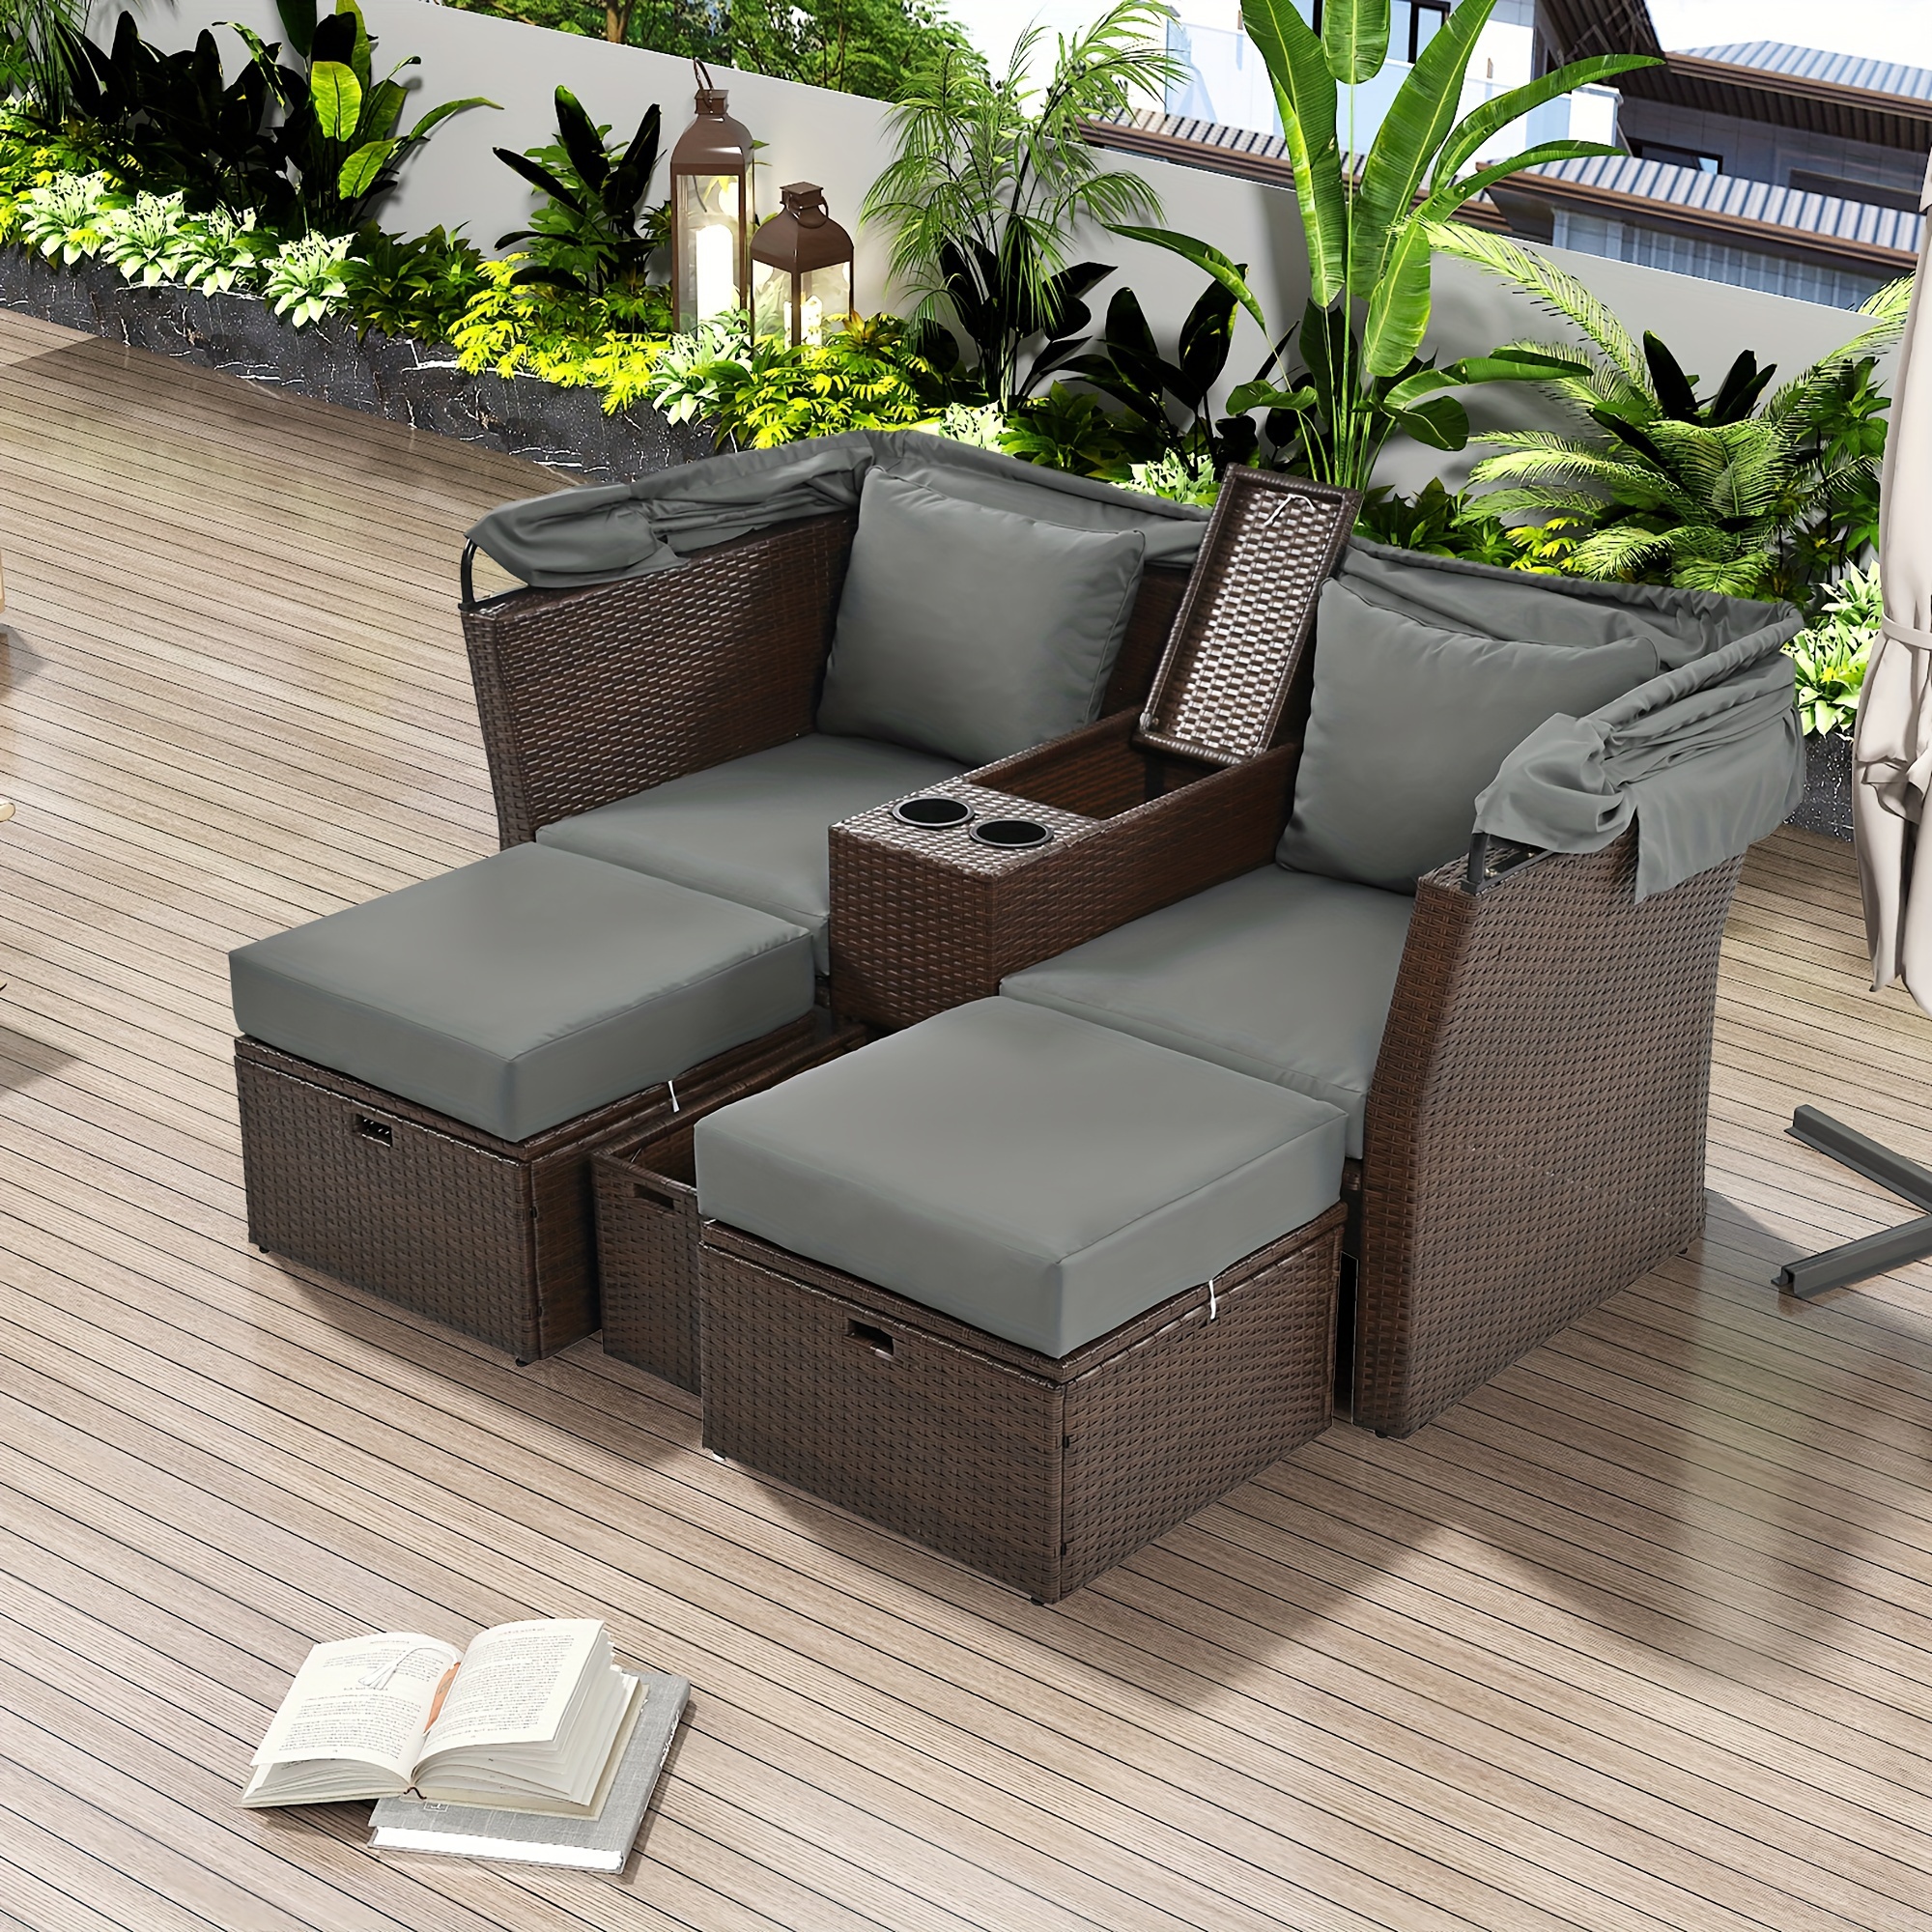 

2-seater Outdoor Patio Daybed, Loveseat Sofa Set With Foldable Awning And Cushions For Garden, Balcony, Poolside